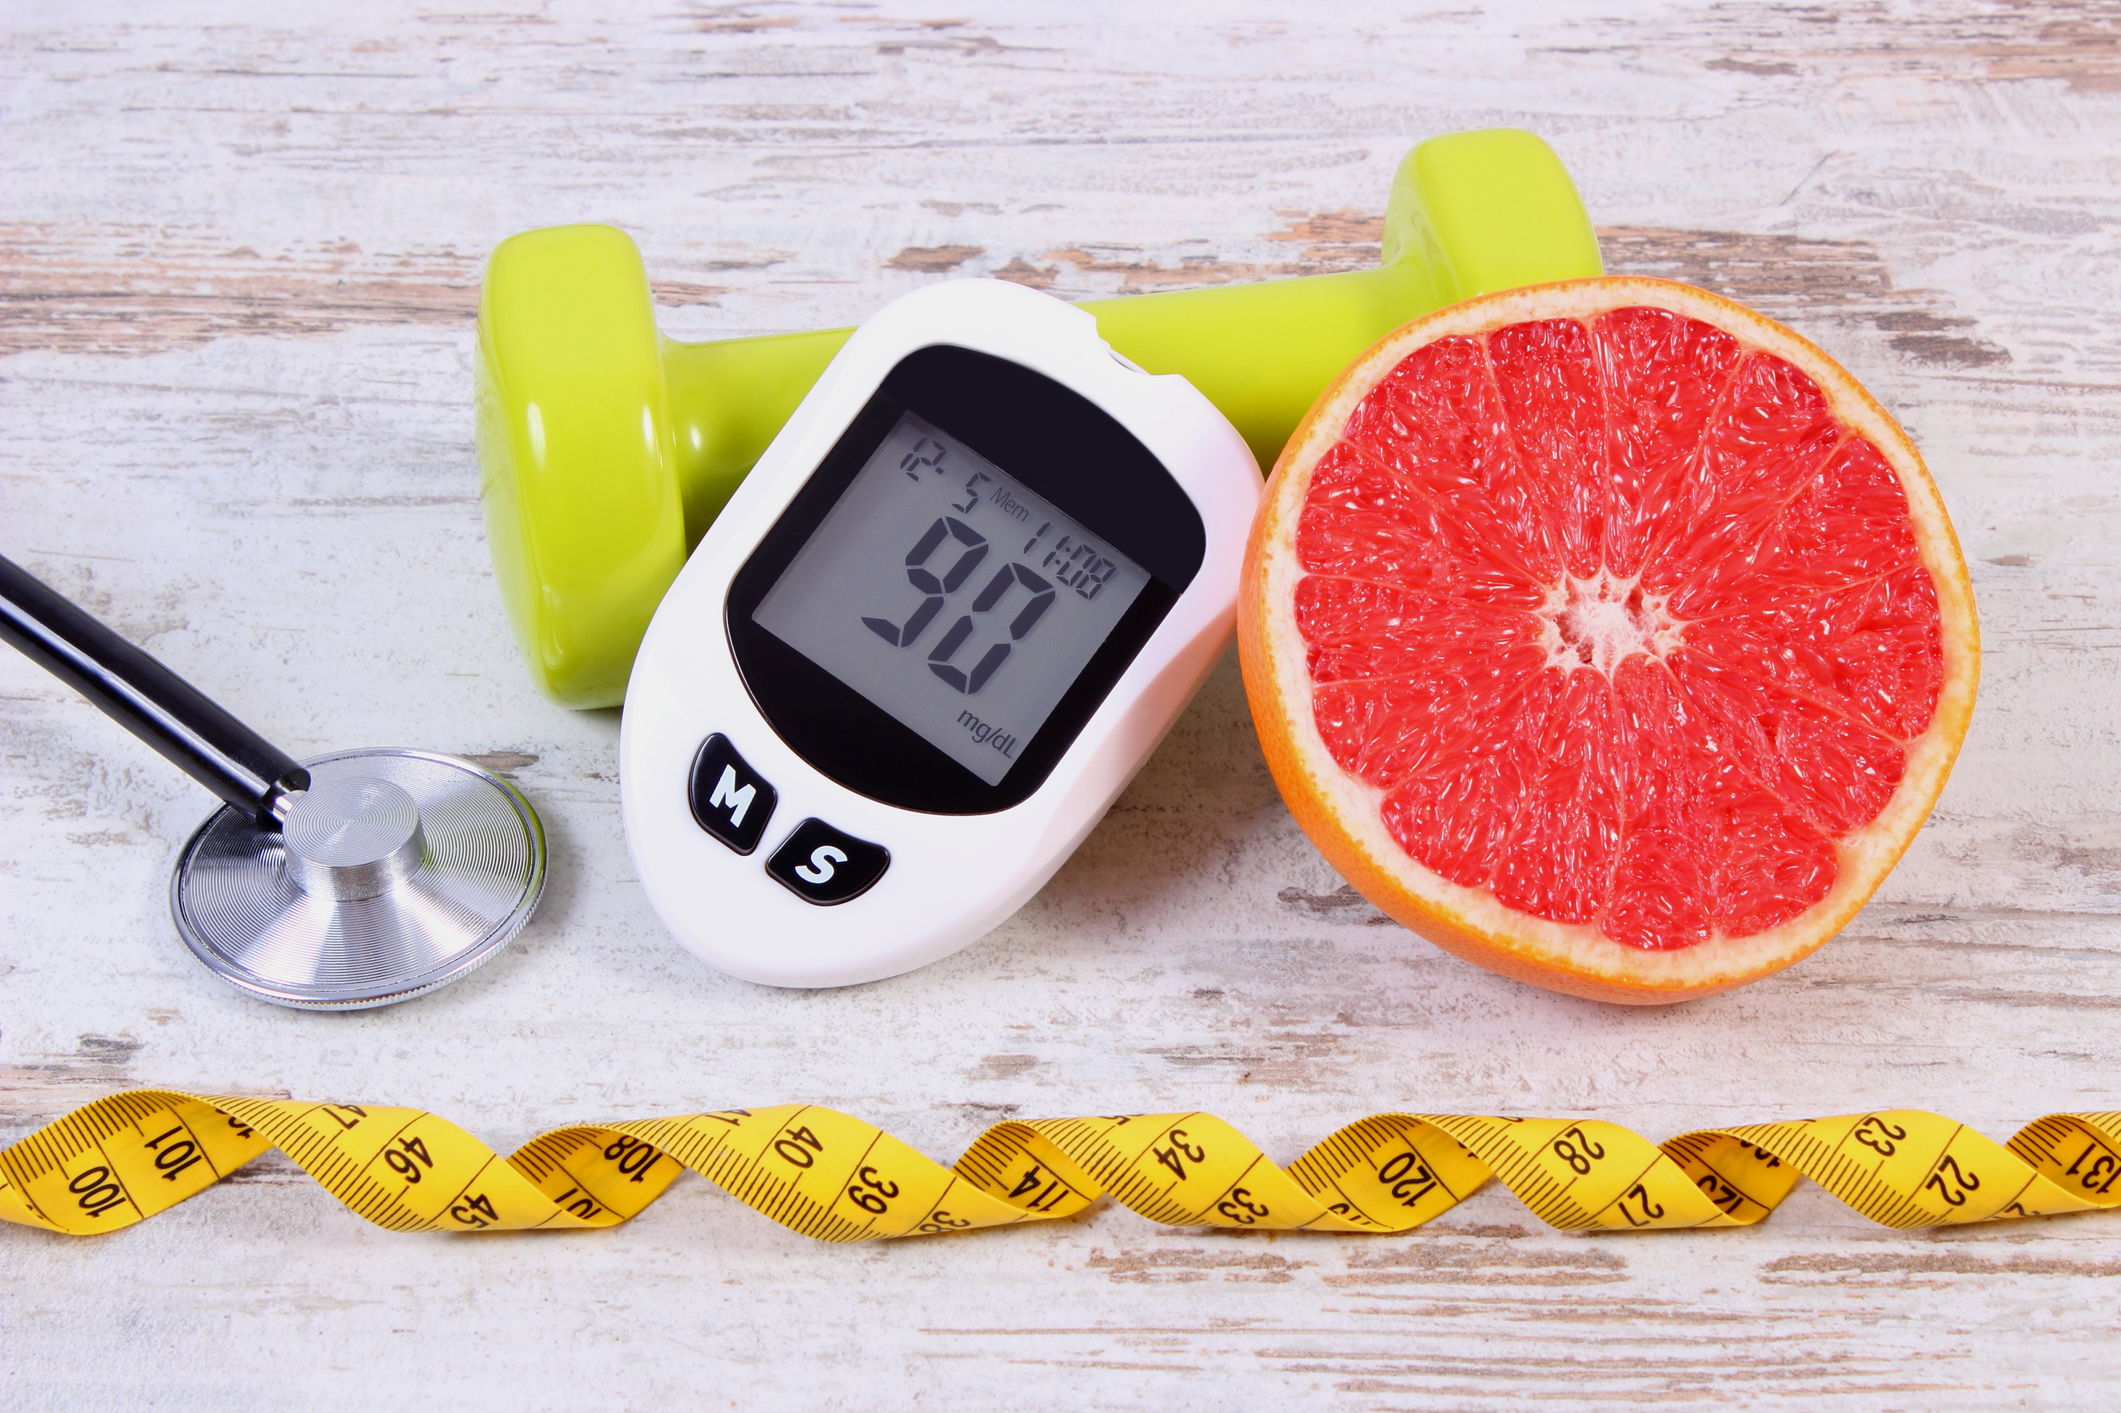 Glucose meter with result measurement sugar level, medical stethoscope, fresh grapefruit and green dumbbells for fitness, concept of diabetes, slimming, healthy lifestyles and nutrition